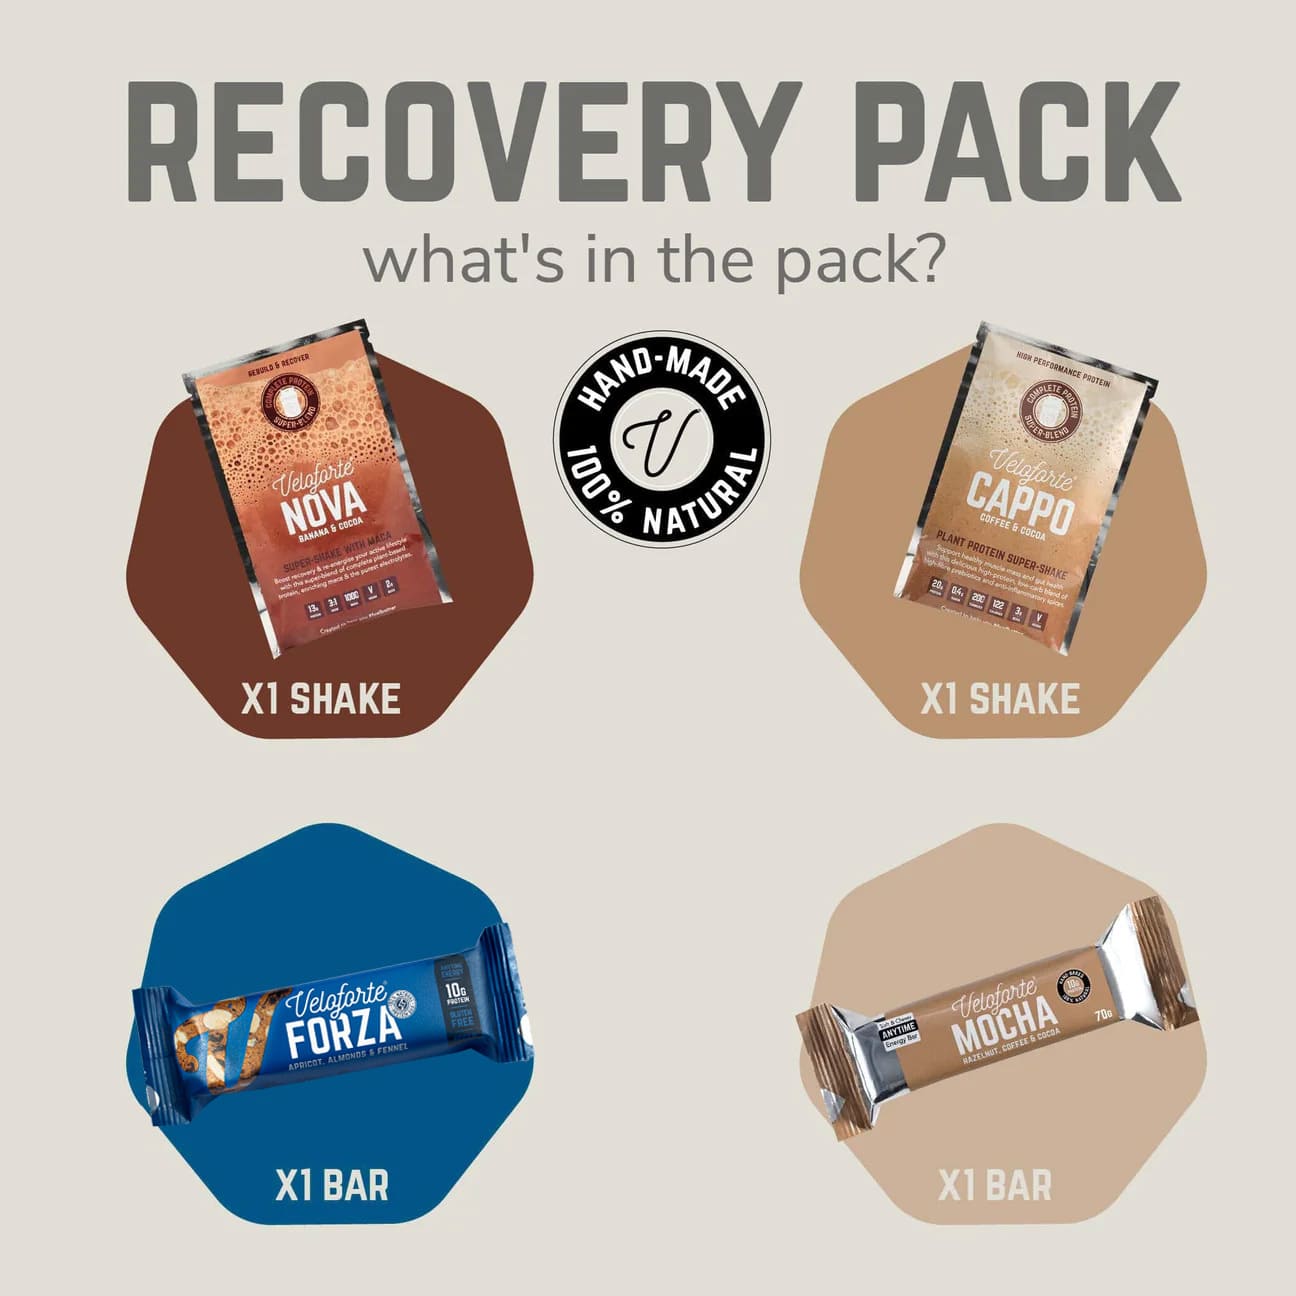 Veloforte Bundles The Recovery Pack